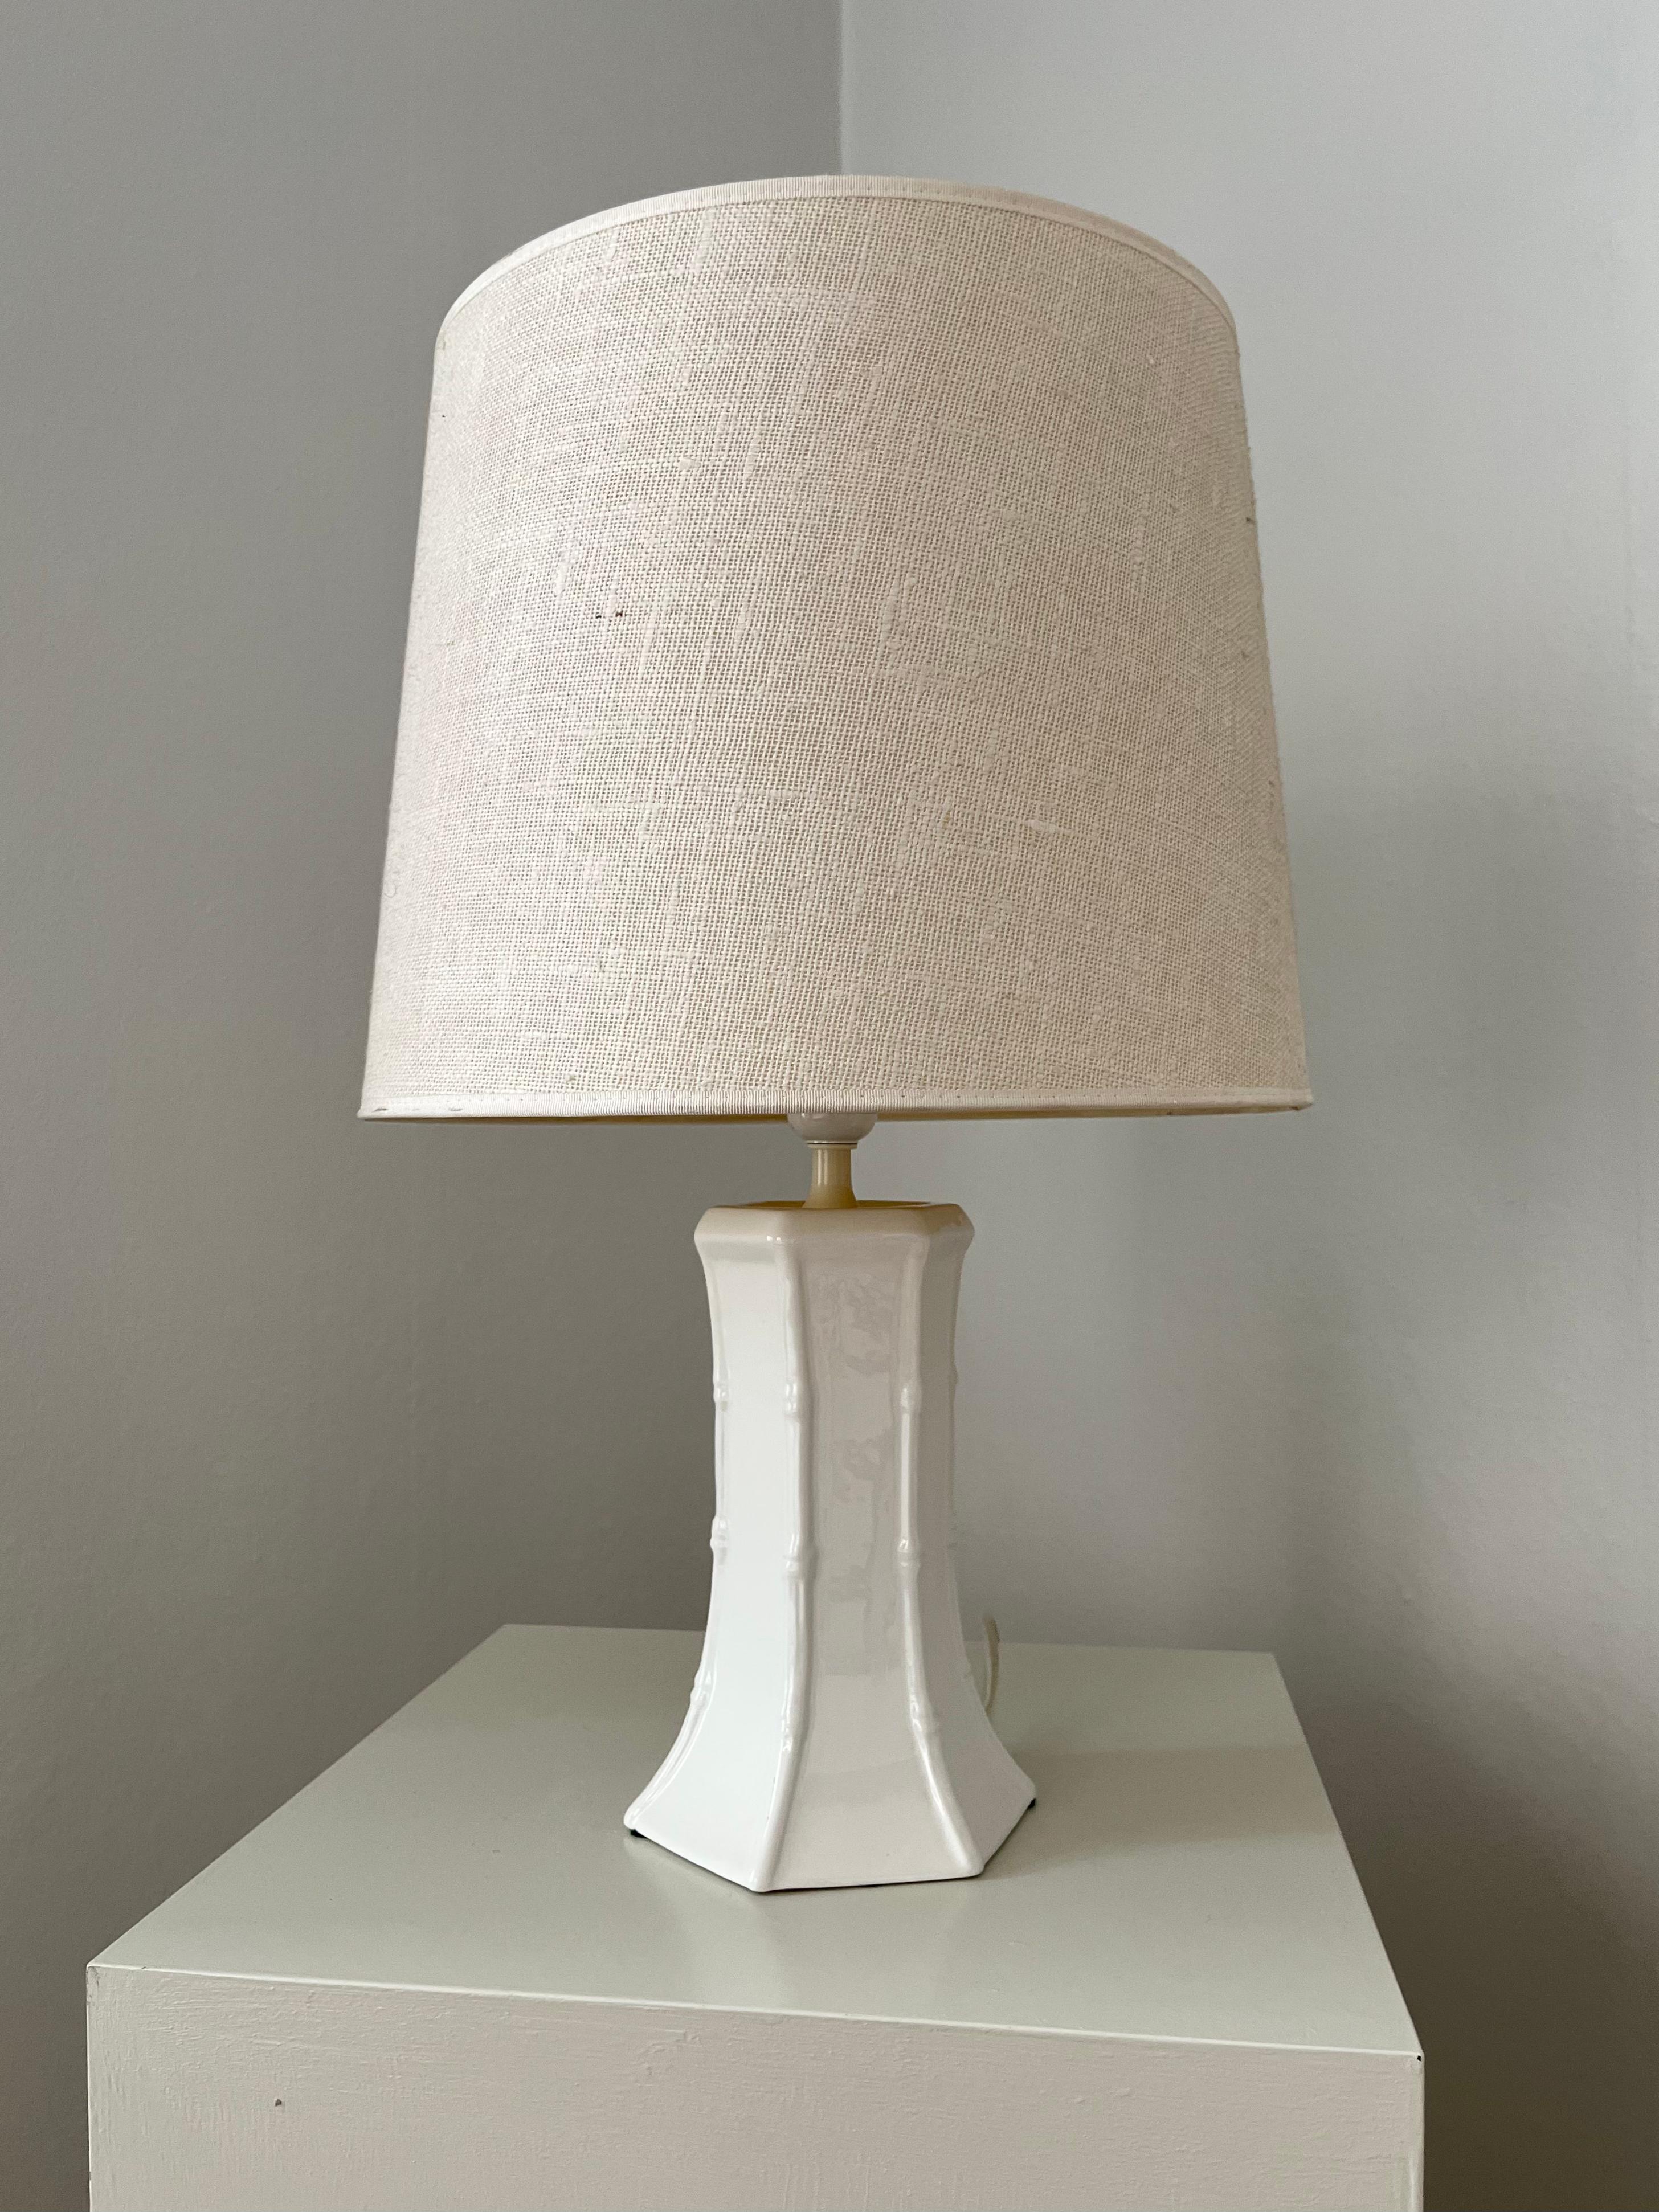 Italian white handmade porcelain table lamp in the shape of bamboo.

Very elegant and decorative table lamp in octagonal shape of bamboo.

Signed on the inside 'Hand Made in Italy'. The height is indicated including the socket. European wired for